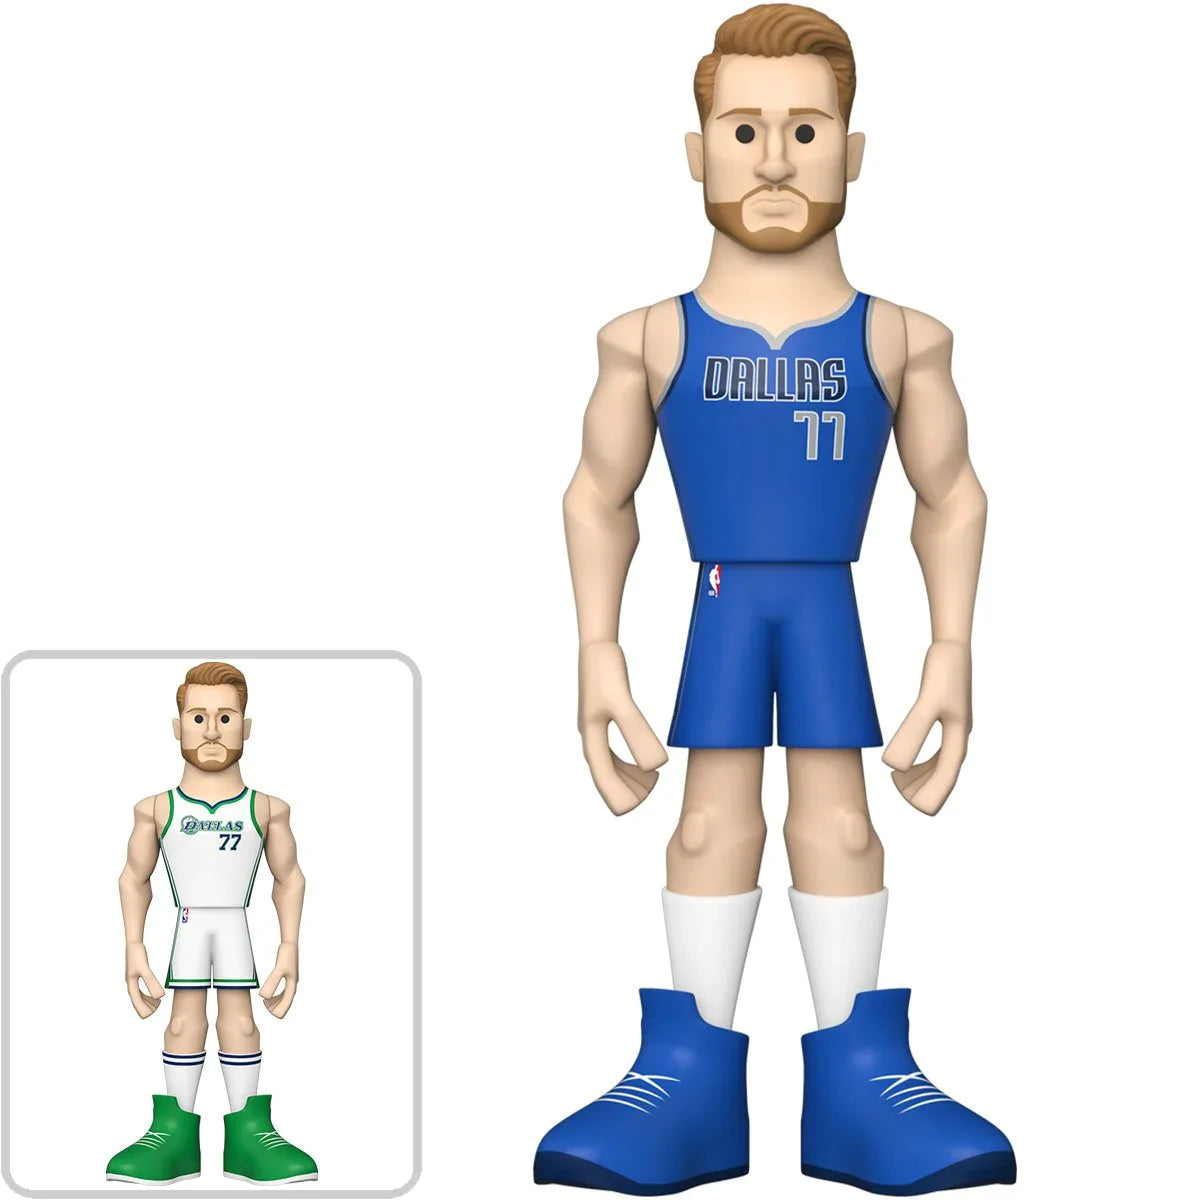 Funko Pop! NBA Series 11 Wave (PRE-ORDER) – AAA Toys and Collectibles